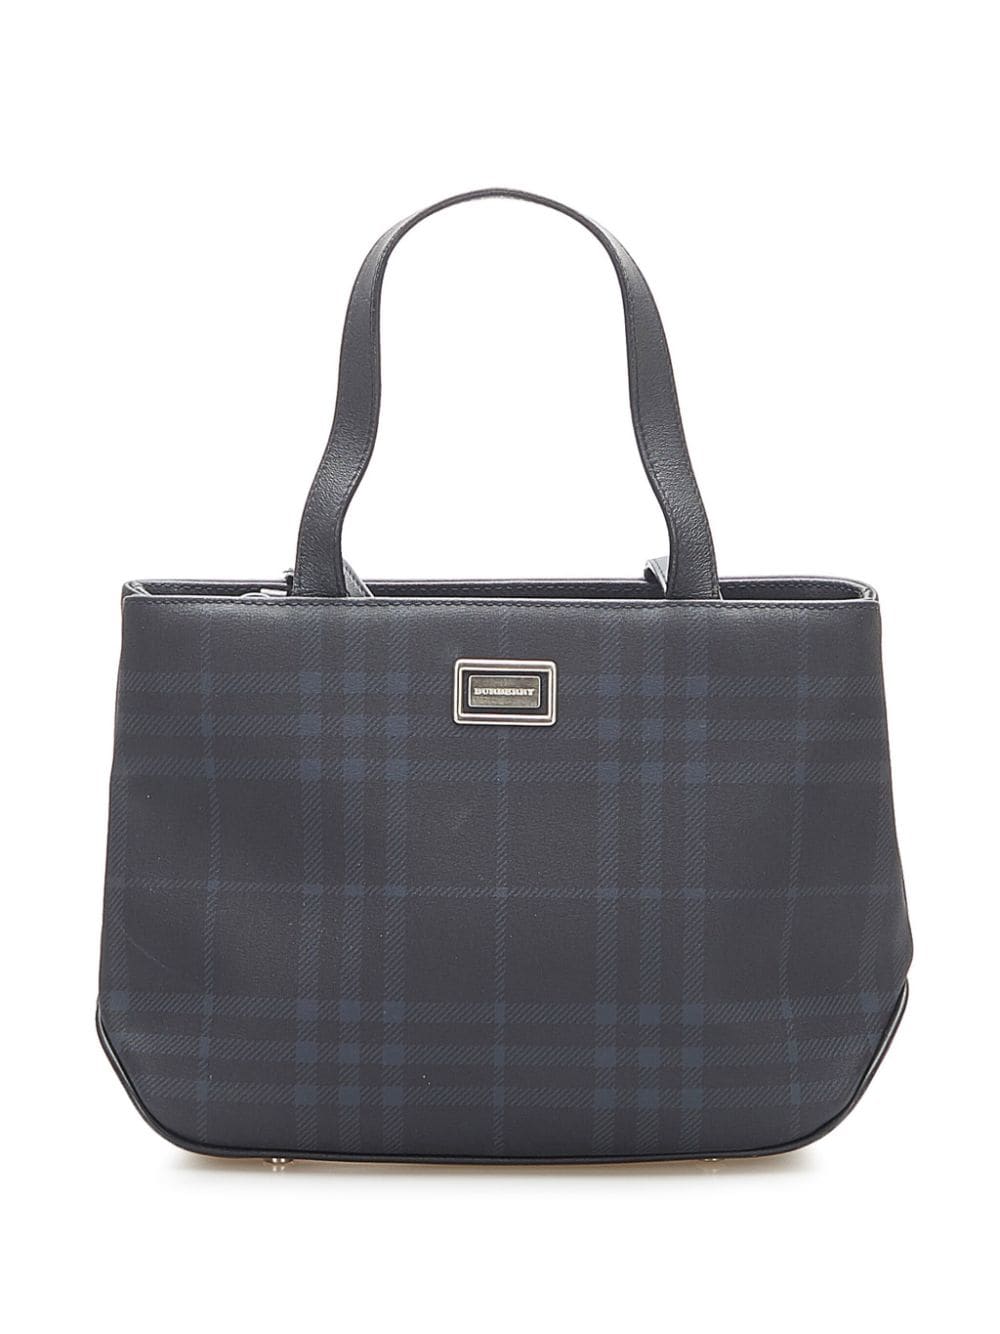 Pre-owned Burberry Smoke Check Tote Bag In Black